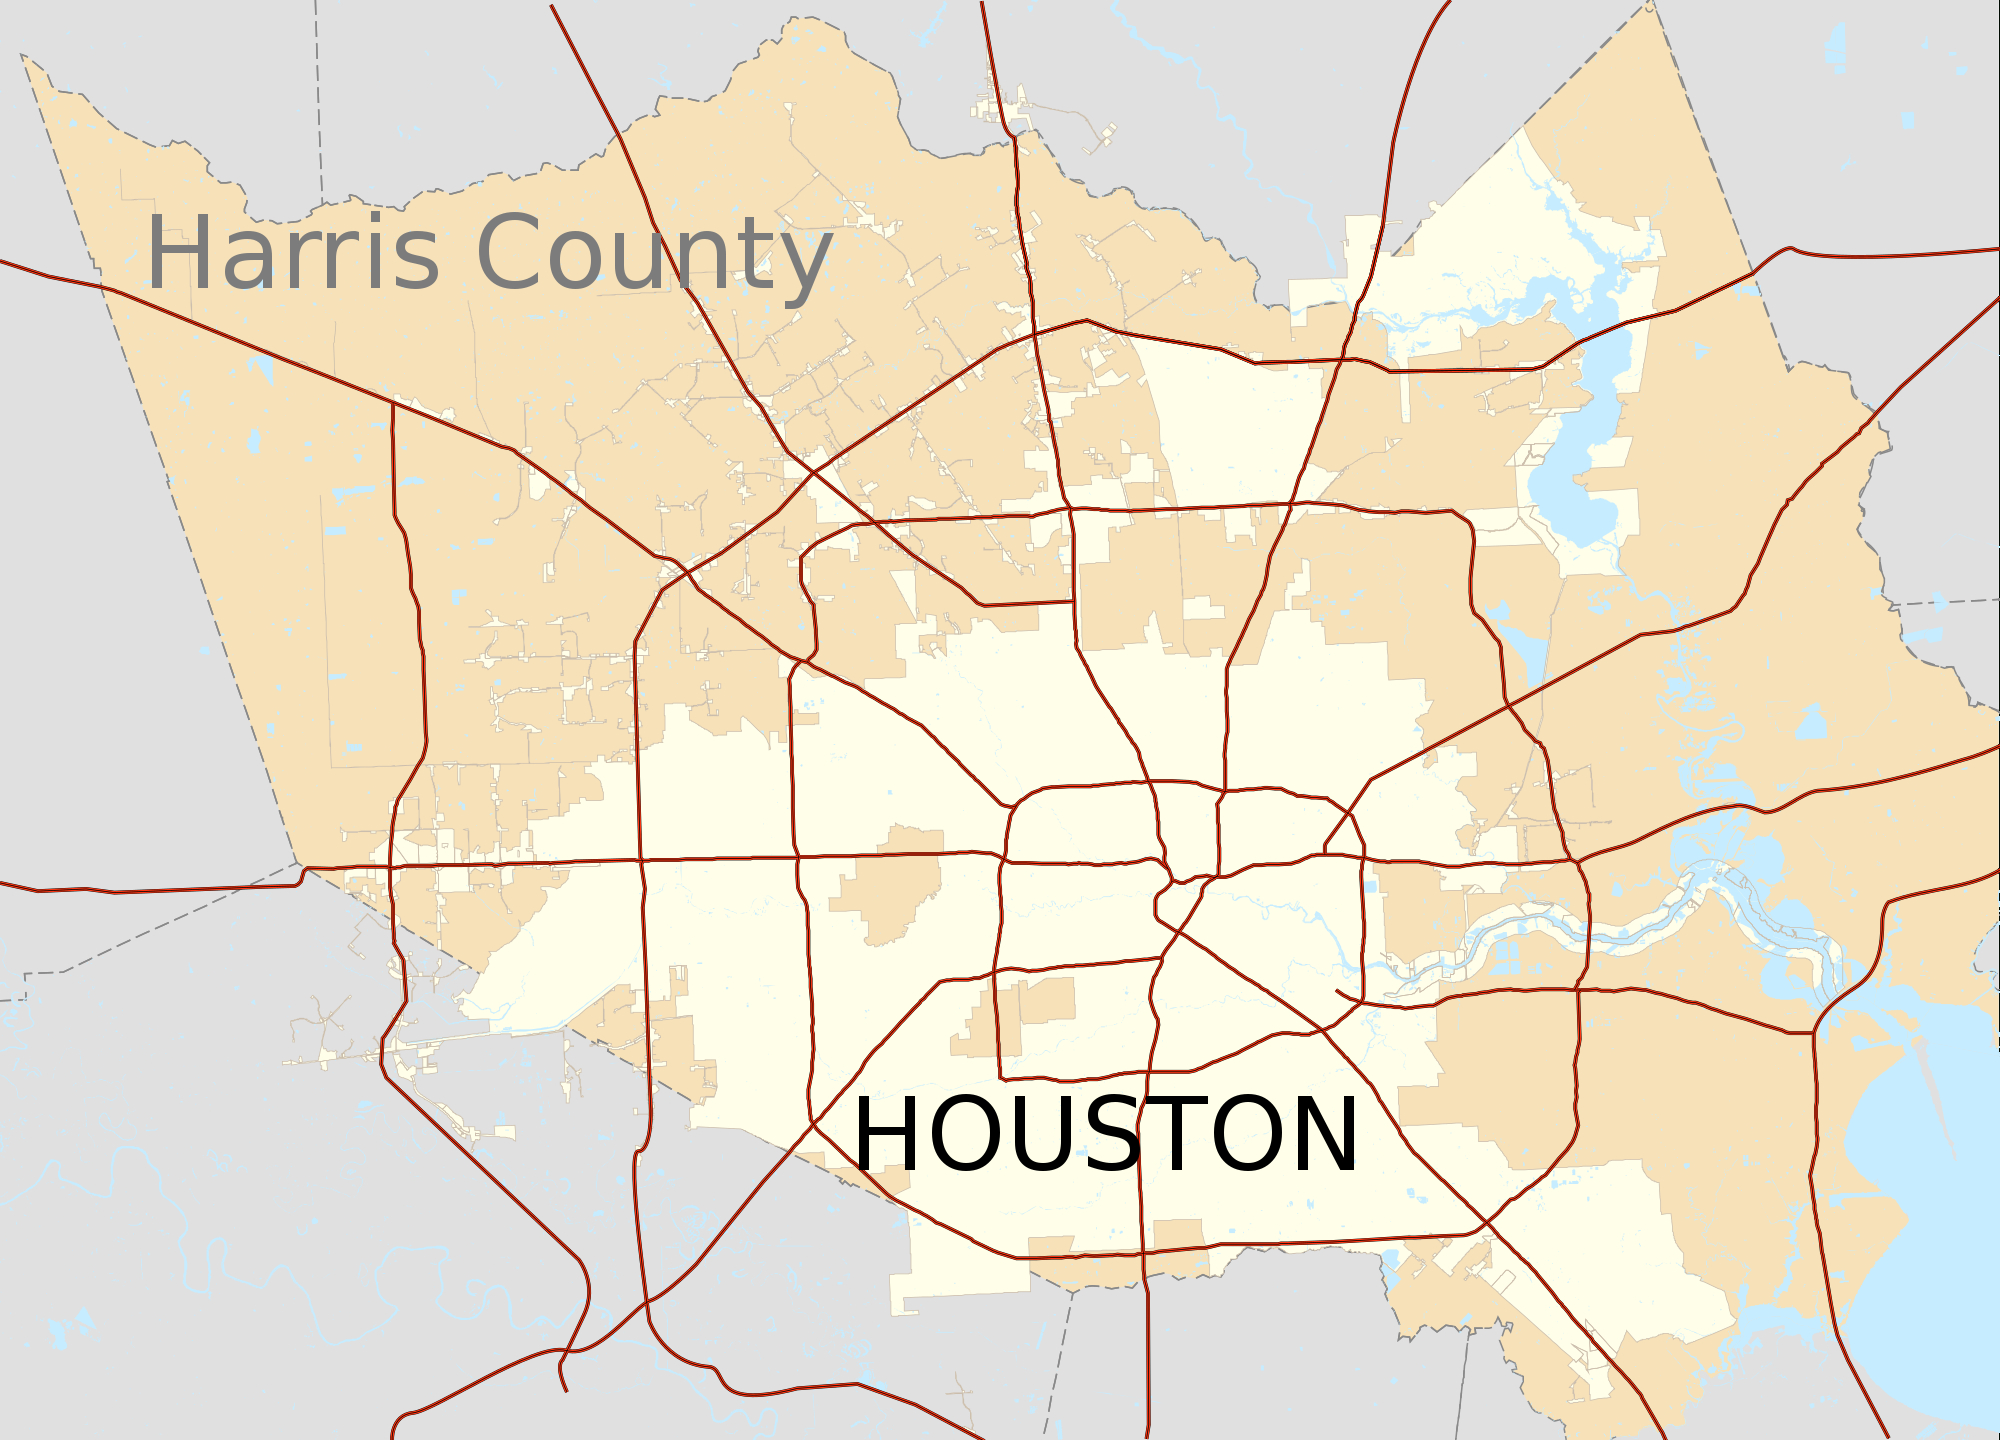 File:map Of Houston Texas And Harris County.svg - Wikimedia Commons - Harris County Texas Map